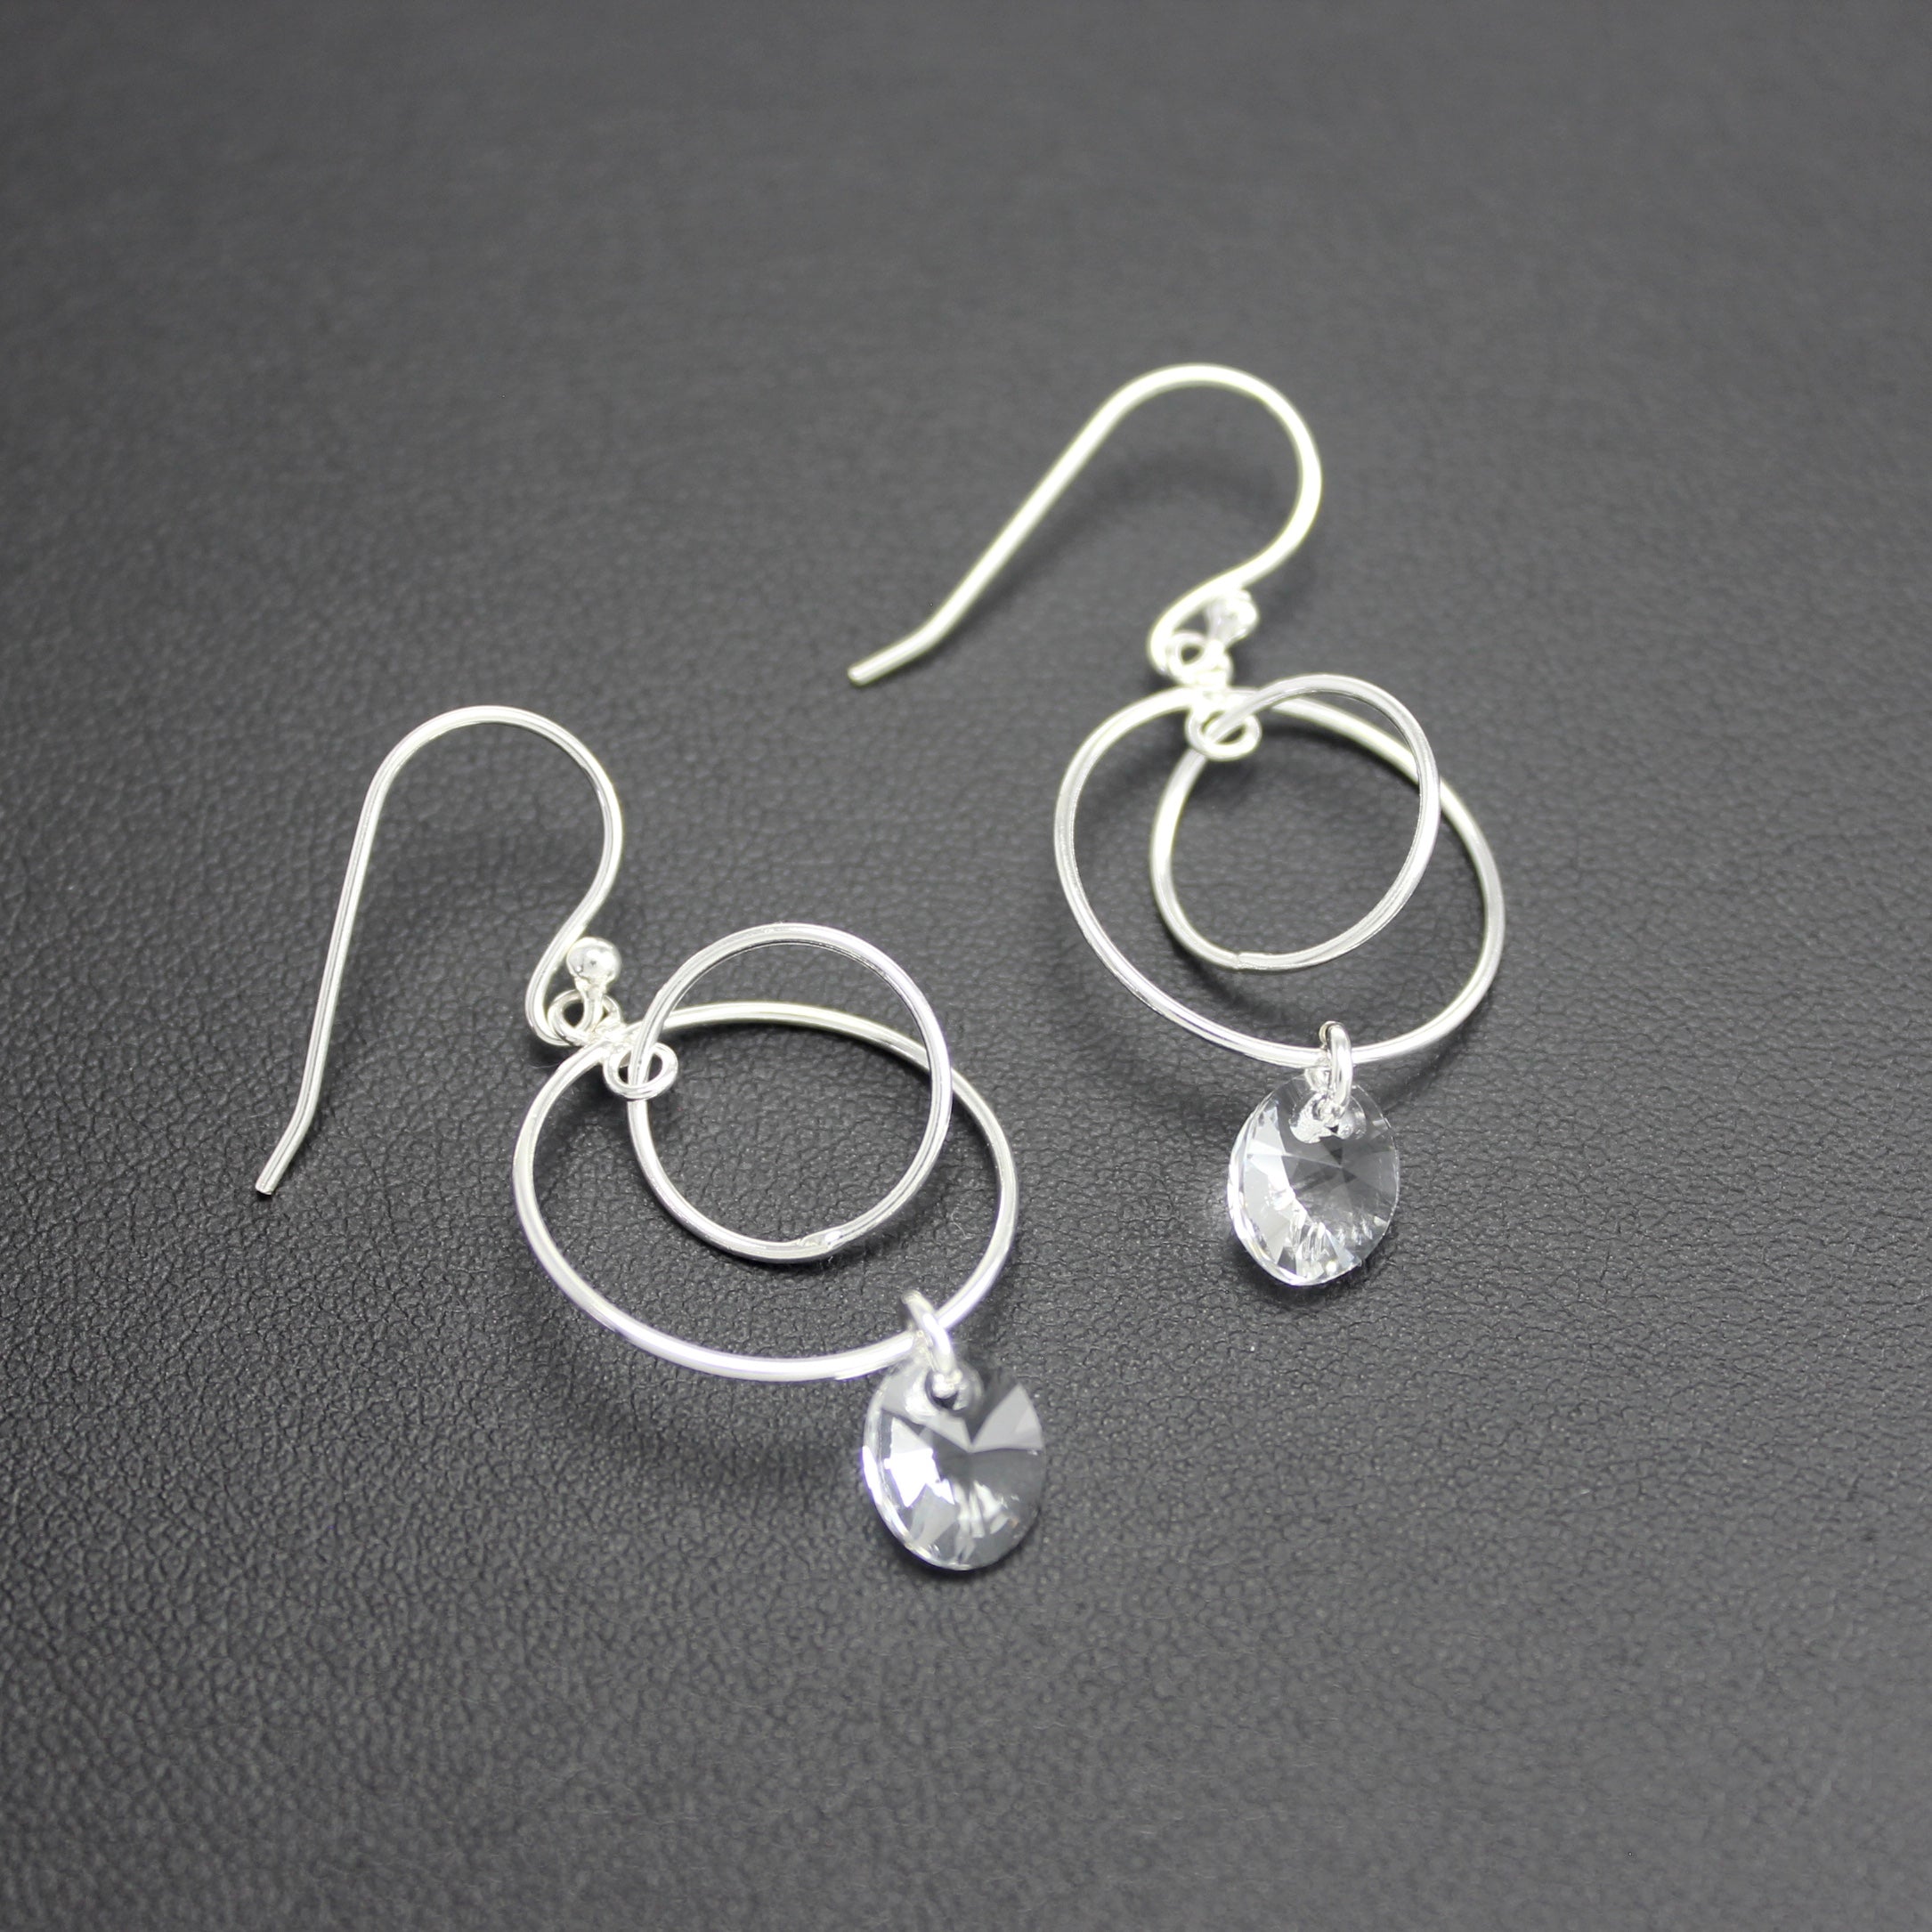 Contemporary Double Ring Charm Crystal Earrings